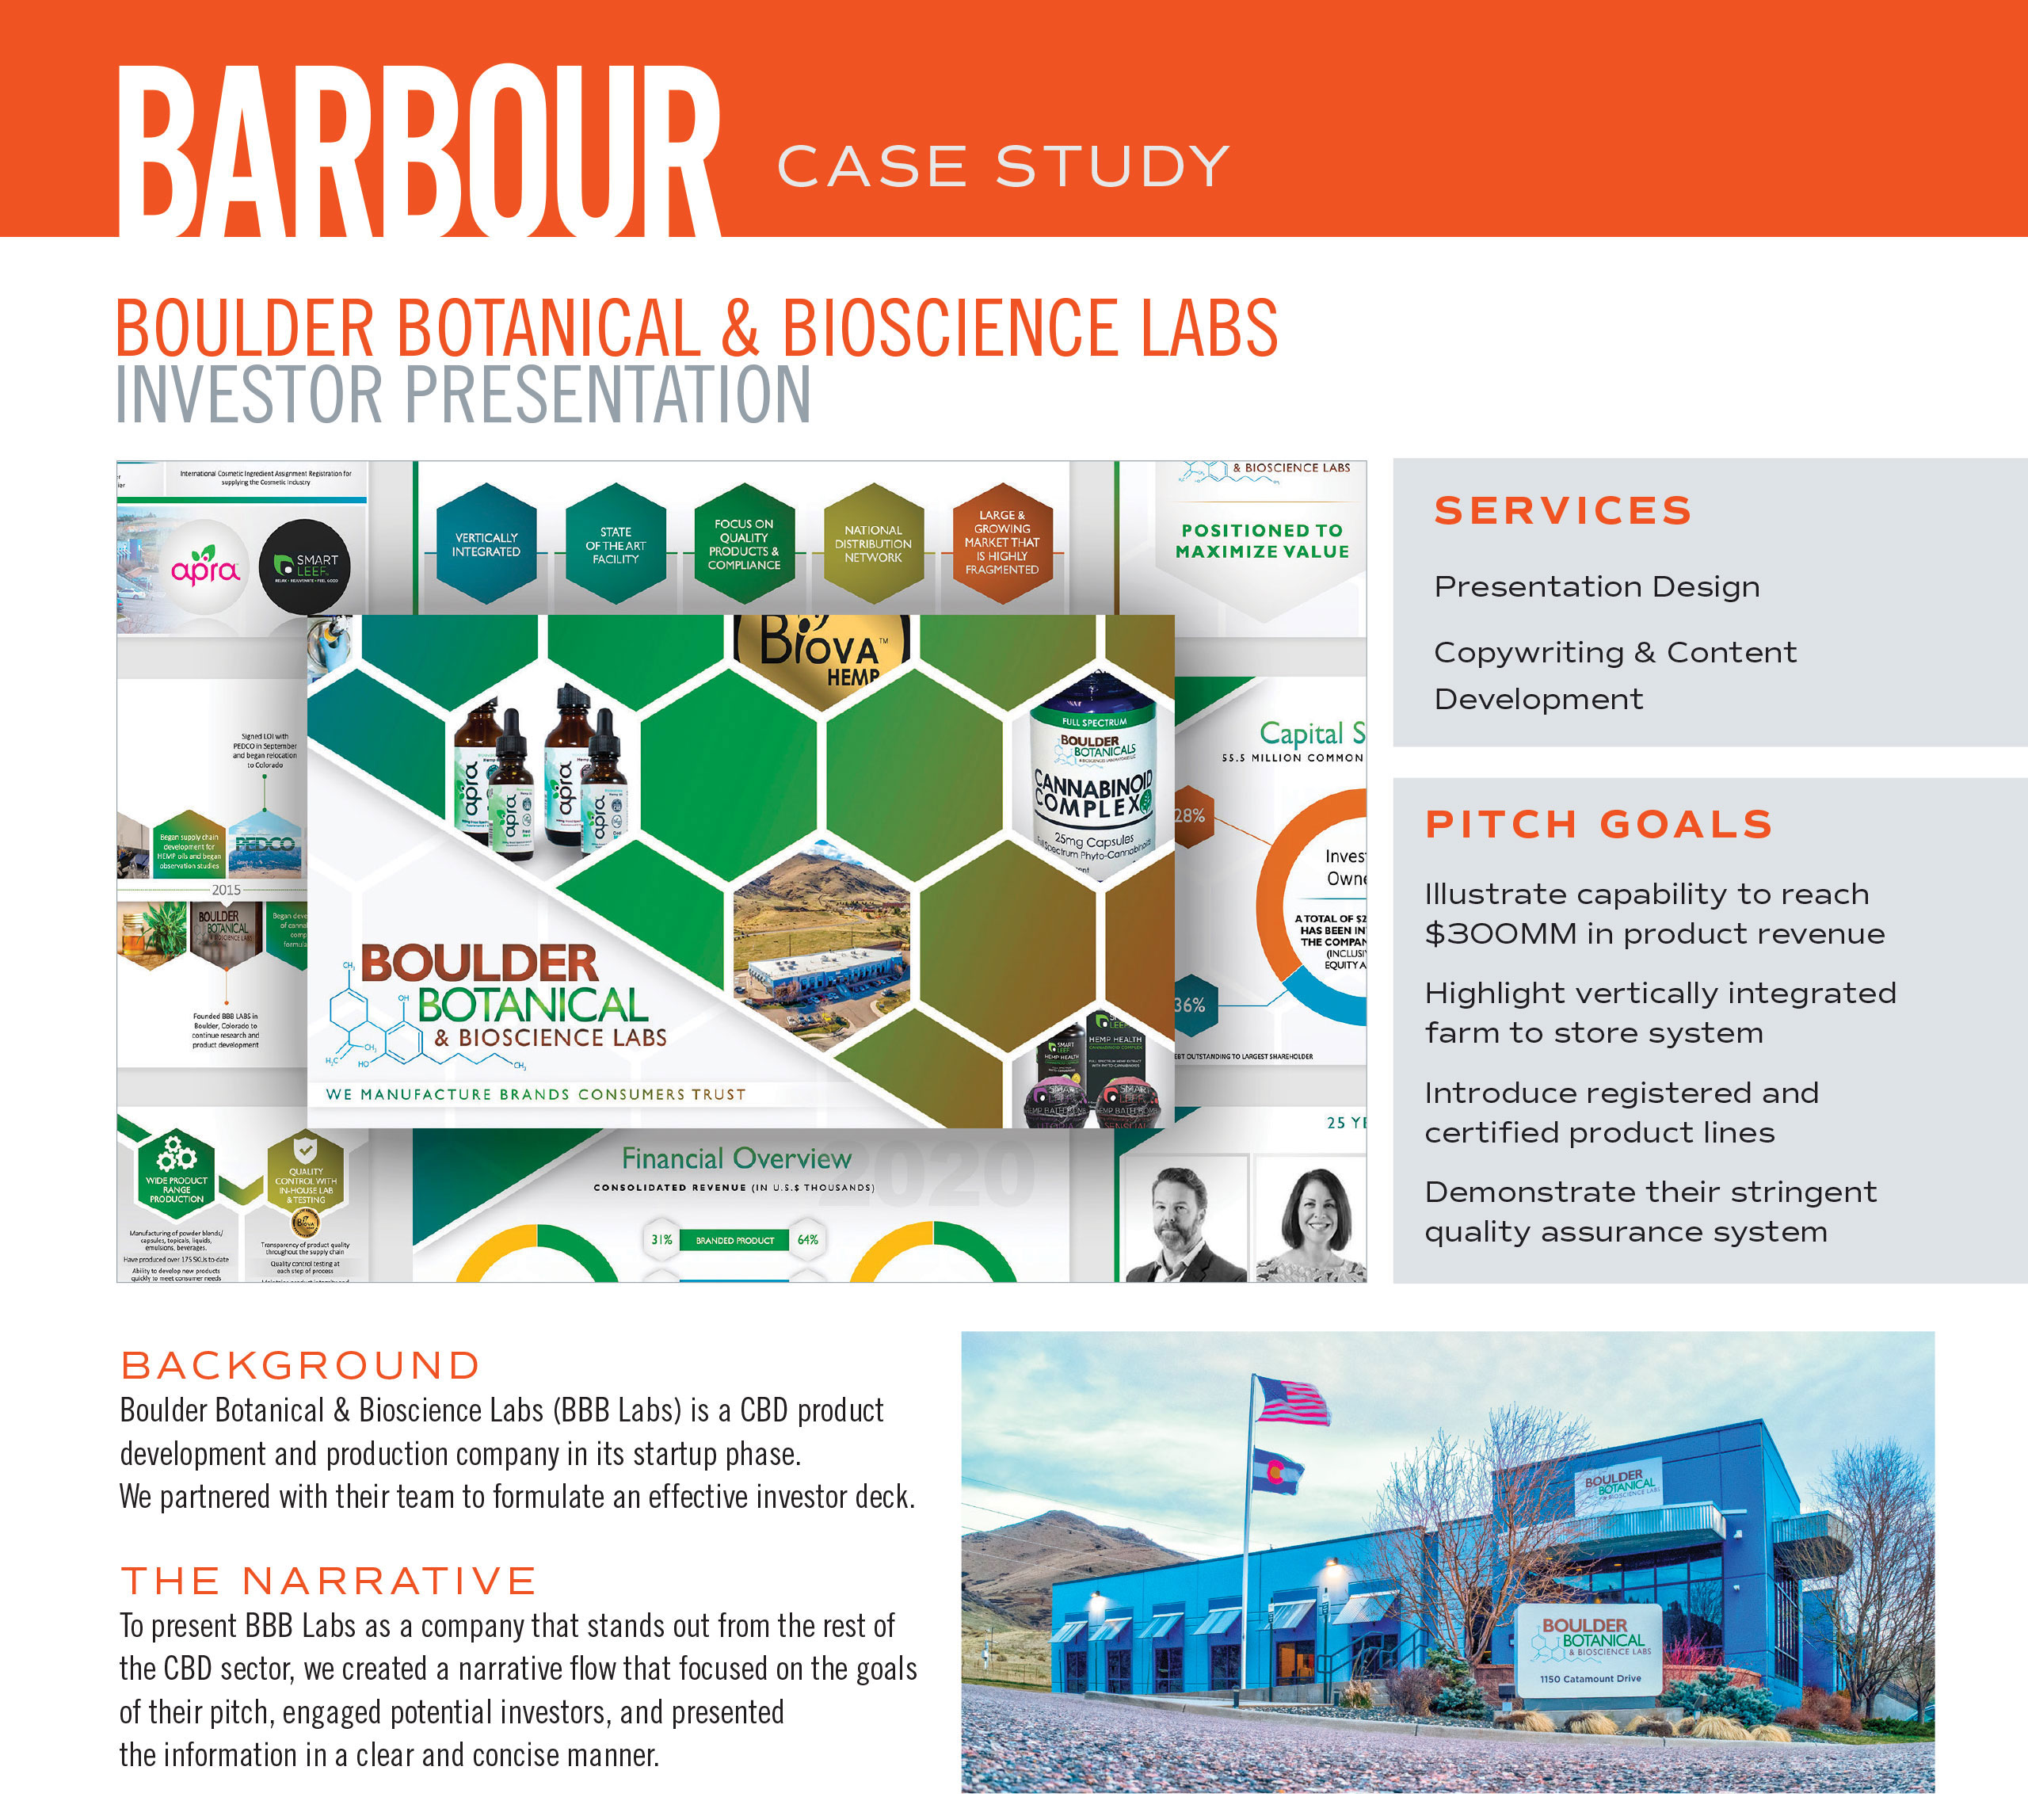 Barbour-BBB_CaseStudy_01